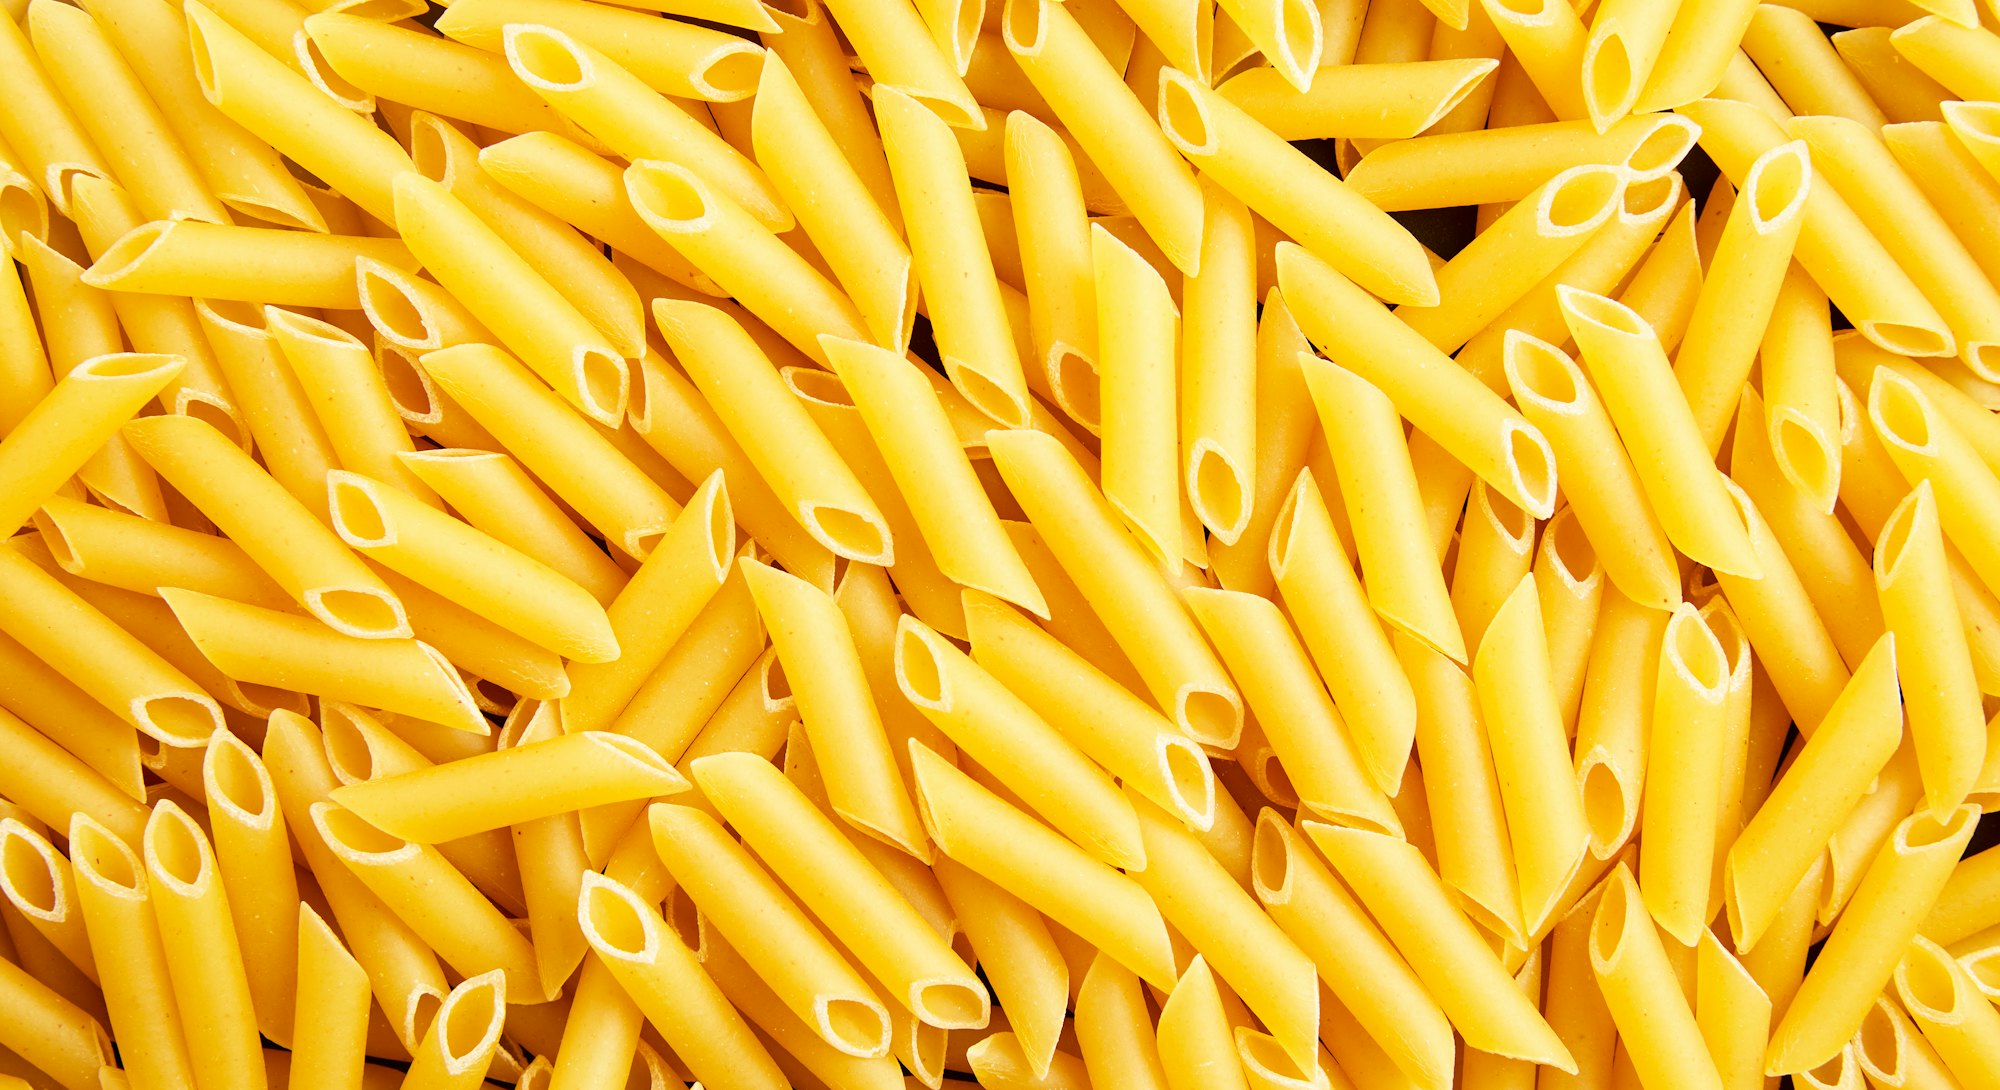 Pasta crafts and activities can keep your kid's attention.